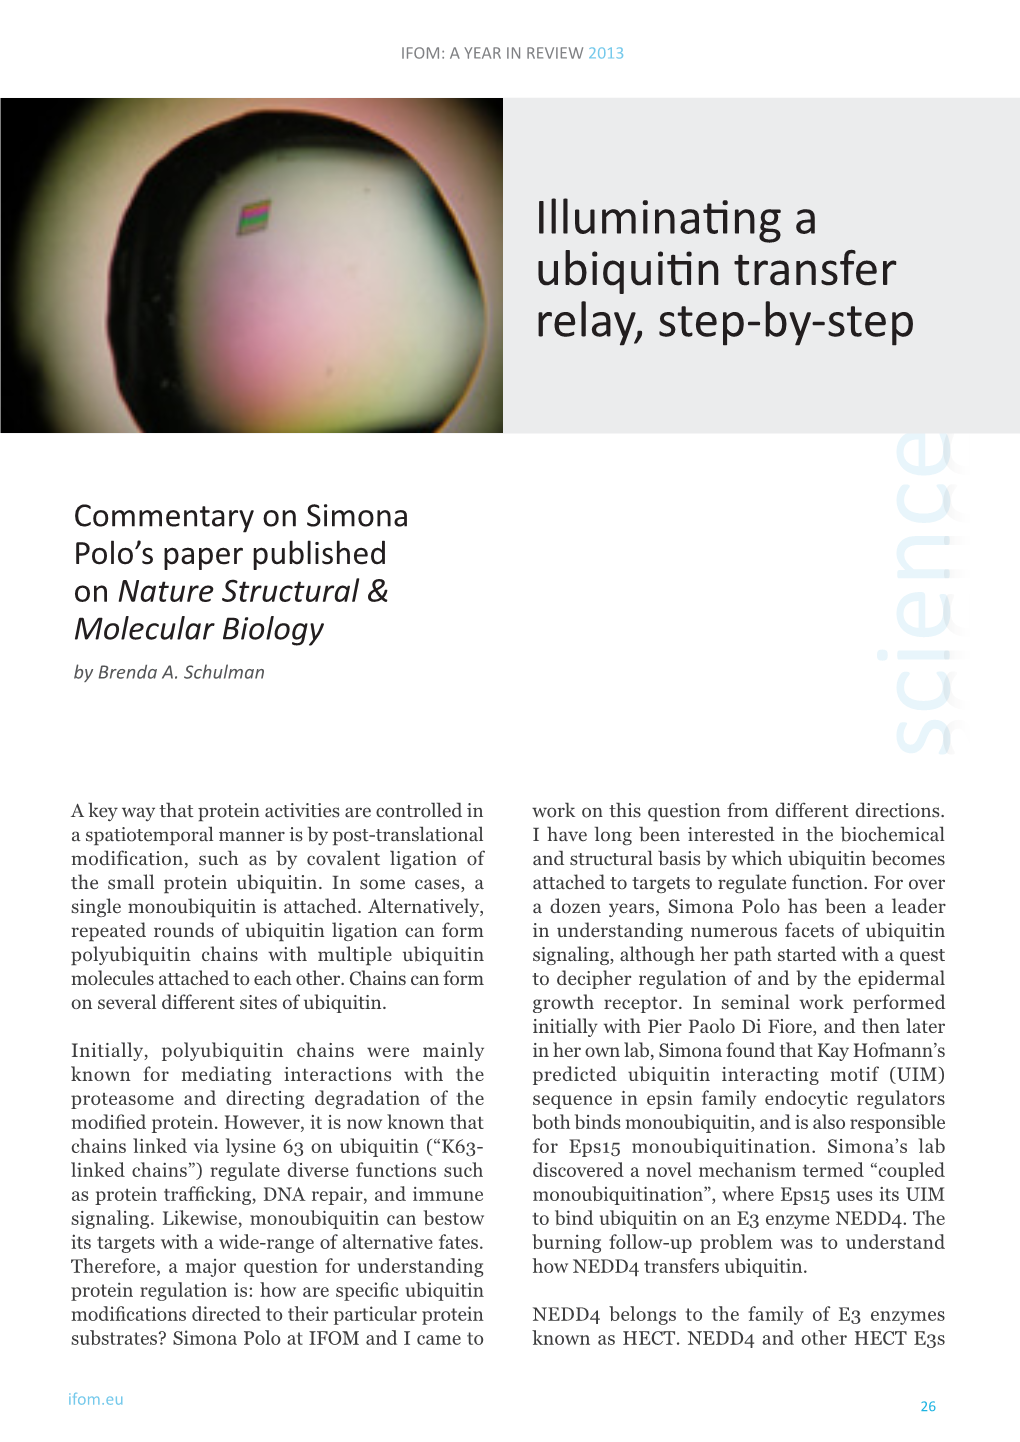 Illuminating a Ubiquitin Transfer Relay, Step-By-Step